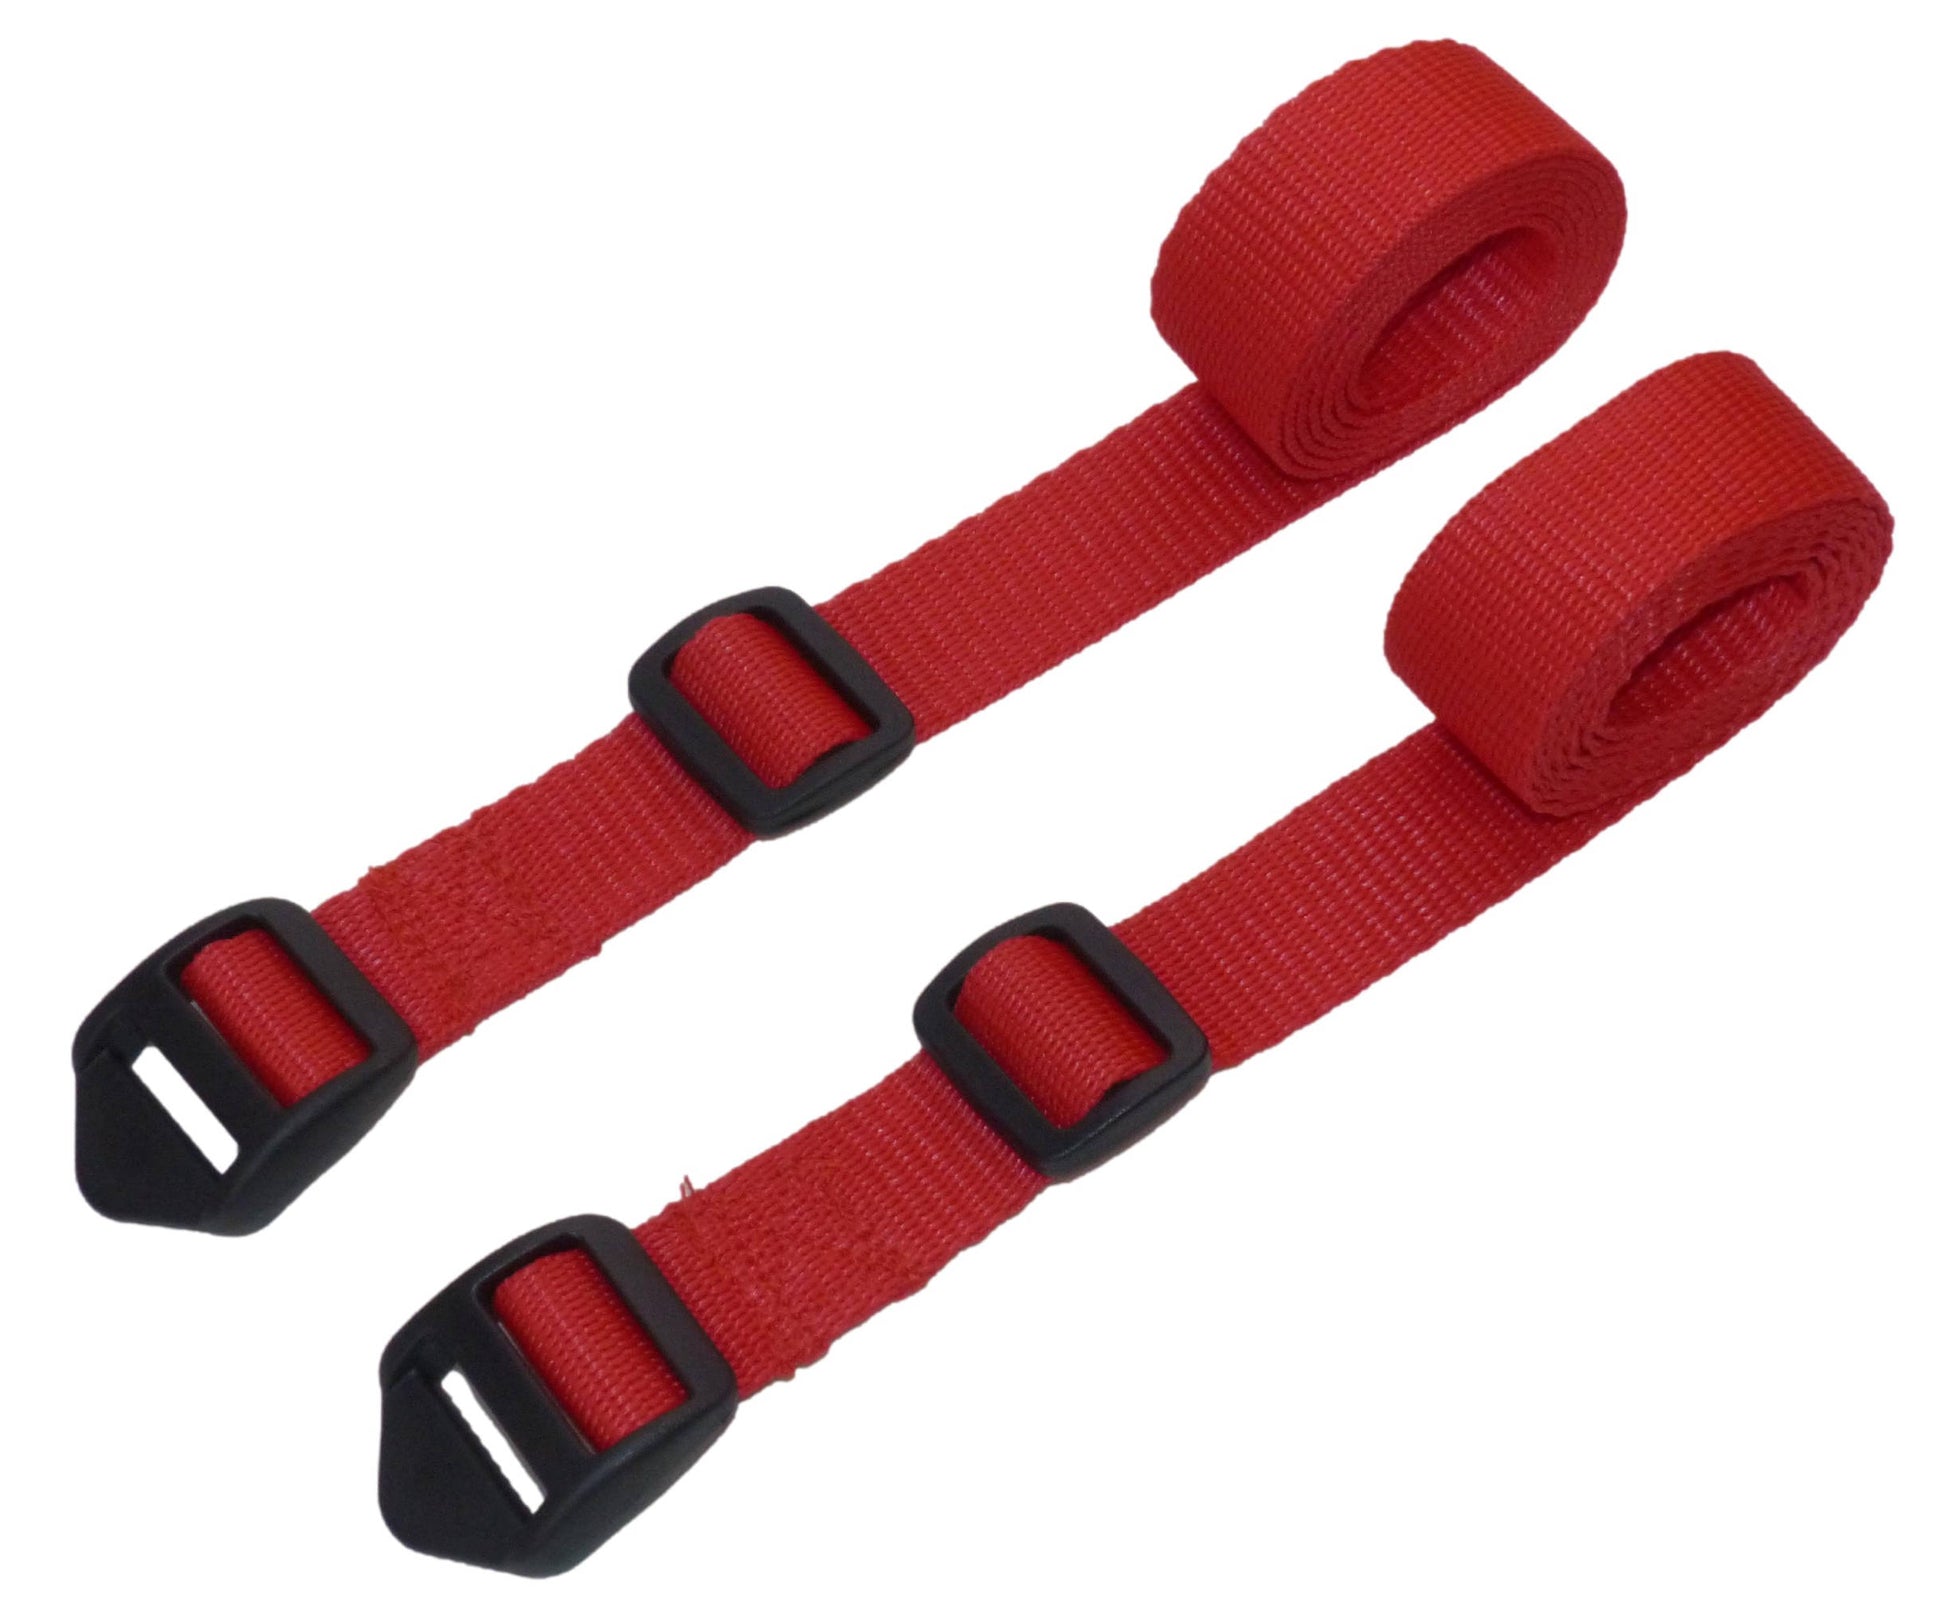 The Benristraps 25mm Camping Straps, 150cm (pair) in red